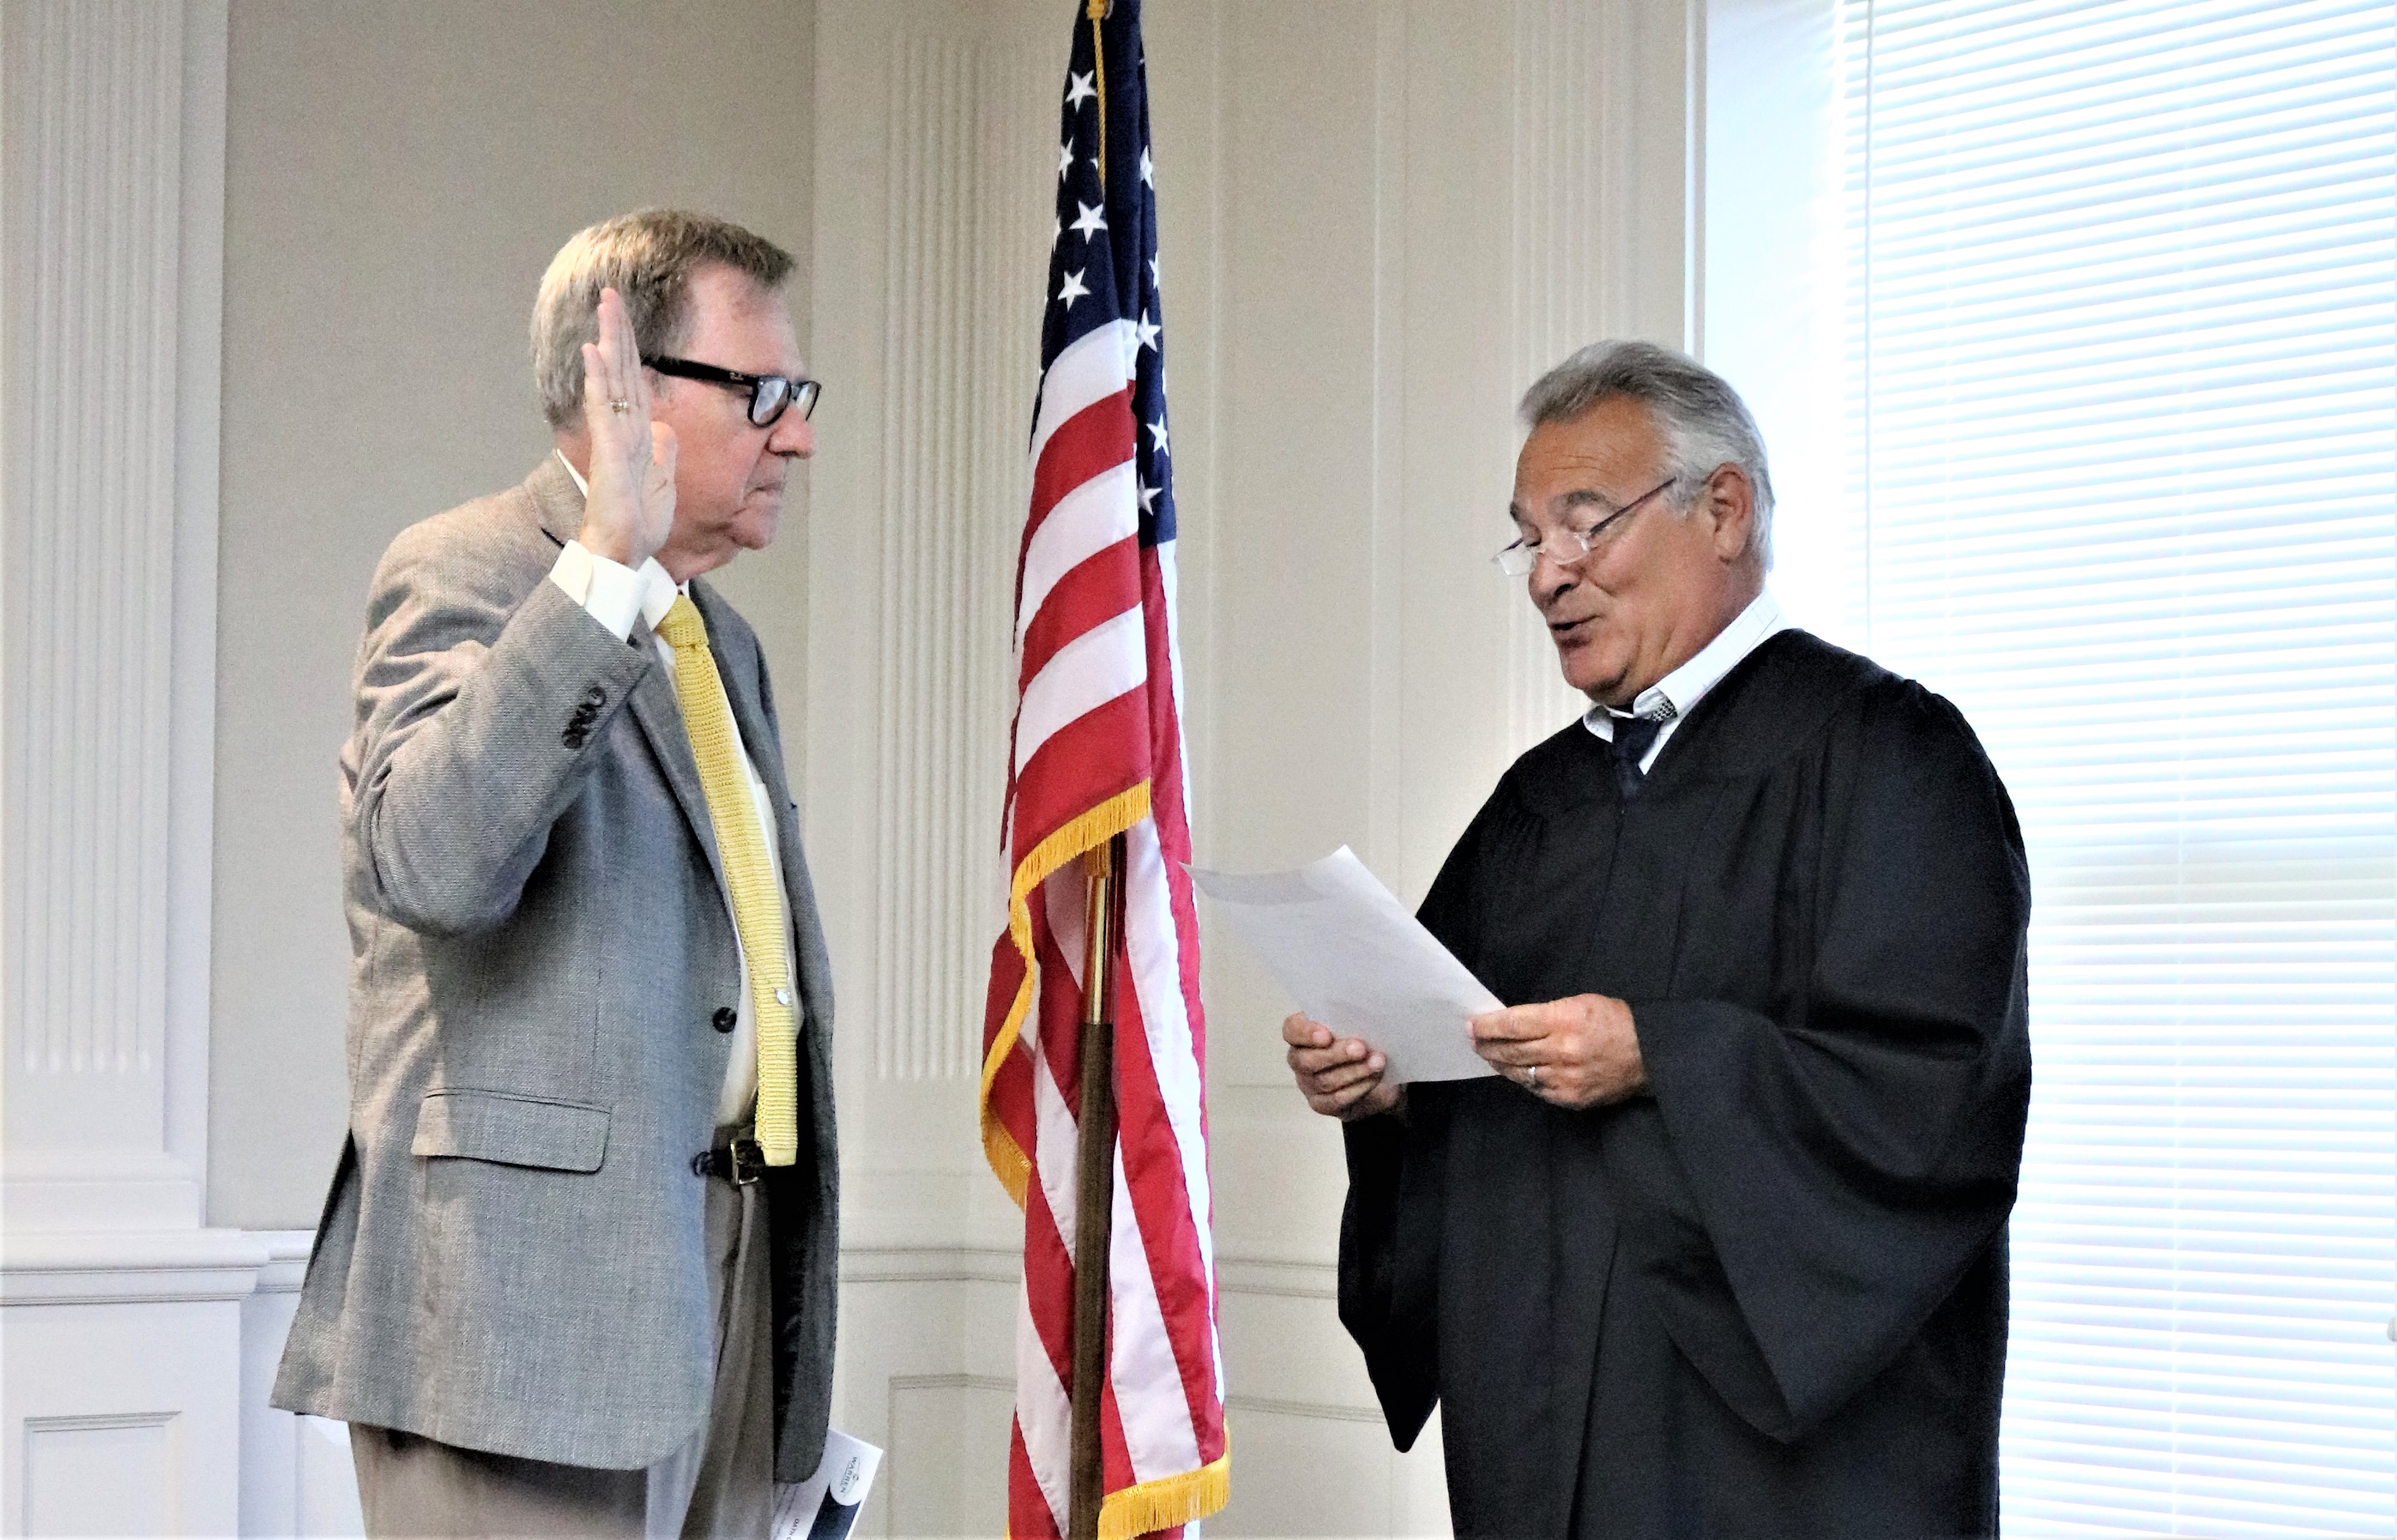 John E. Fowley is sworn in by Trumbull County Judge James A. Fredericka